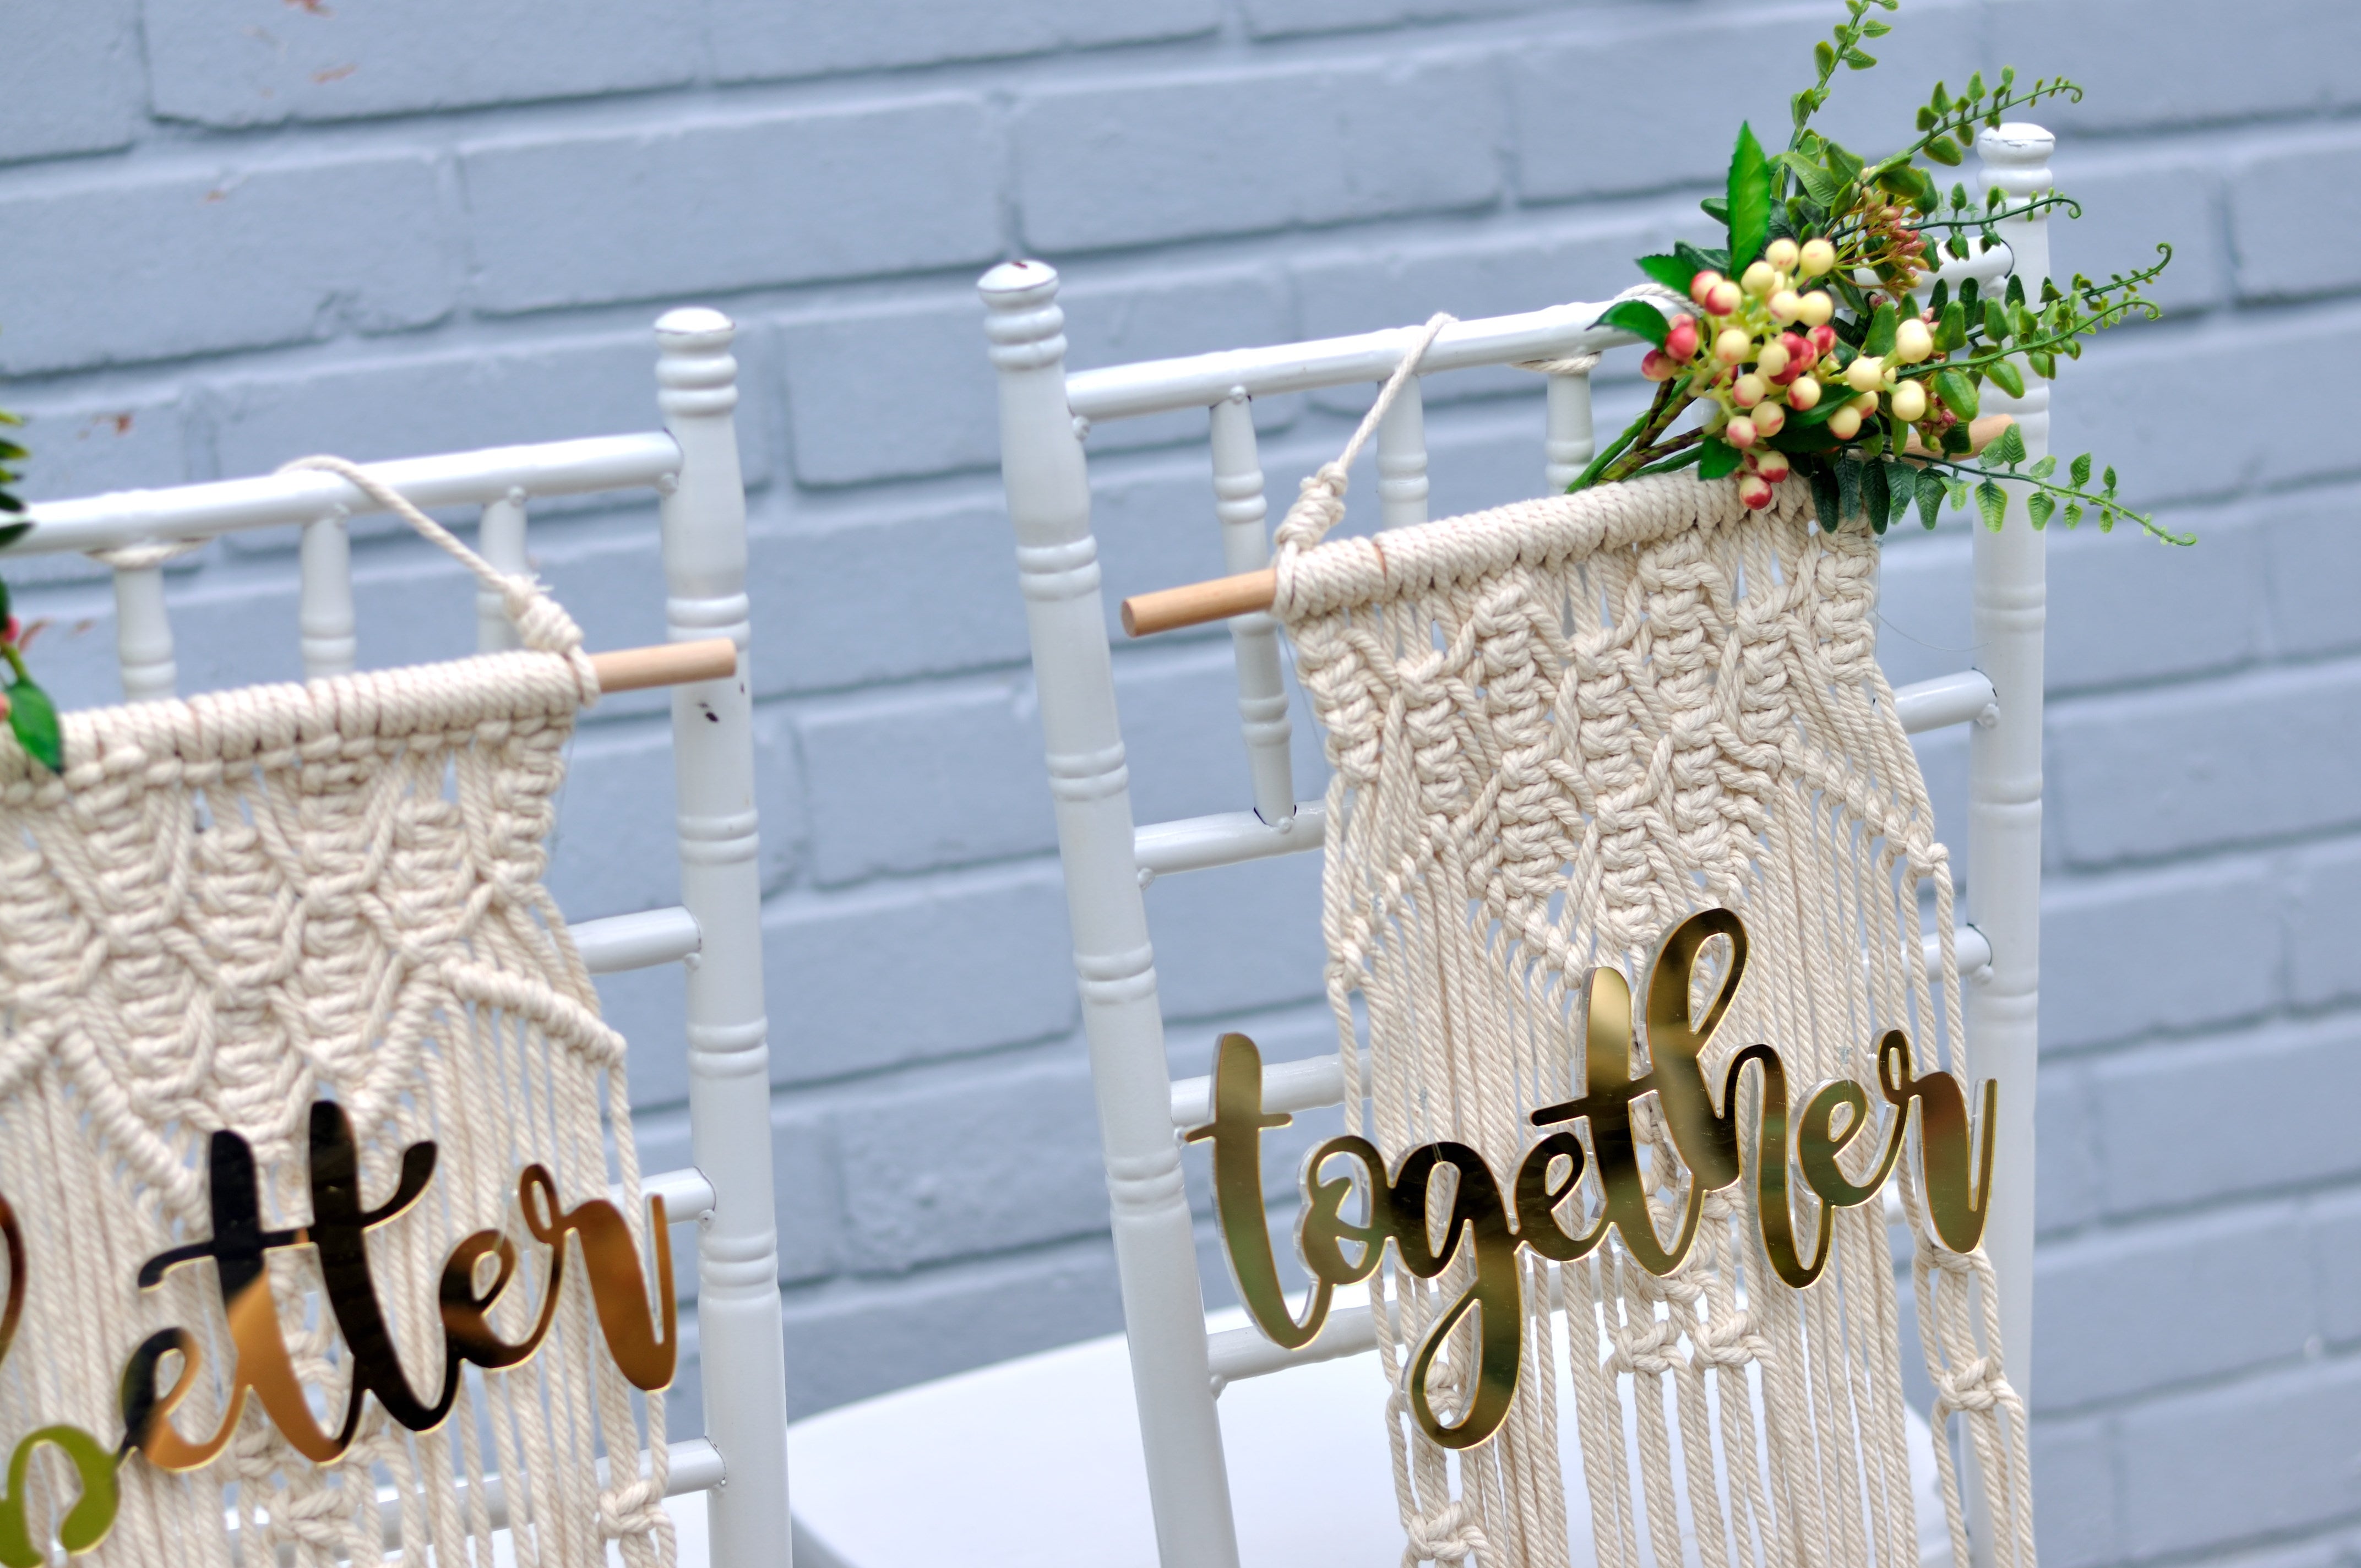 Macrame chair sign - Better Together